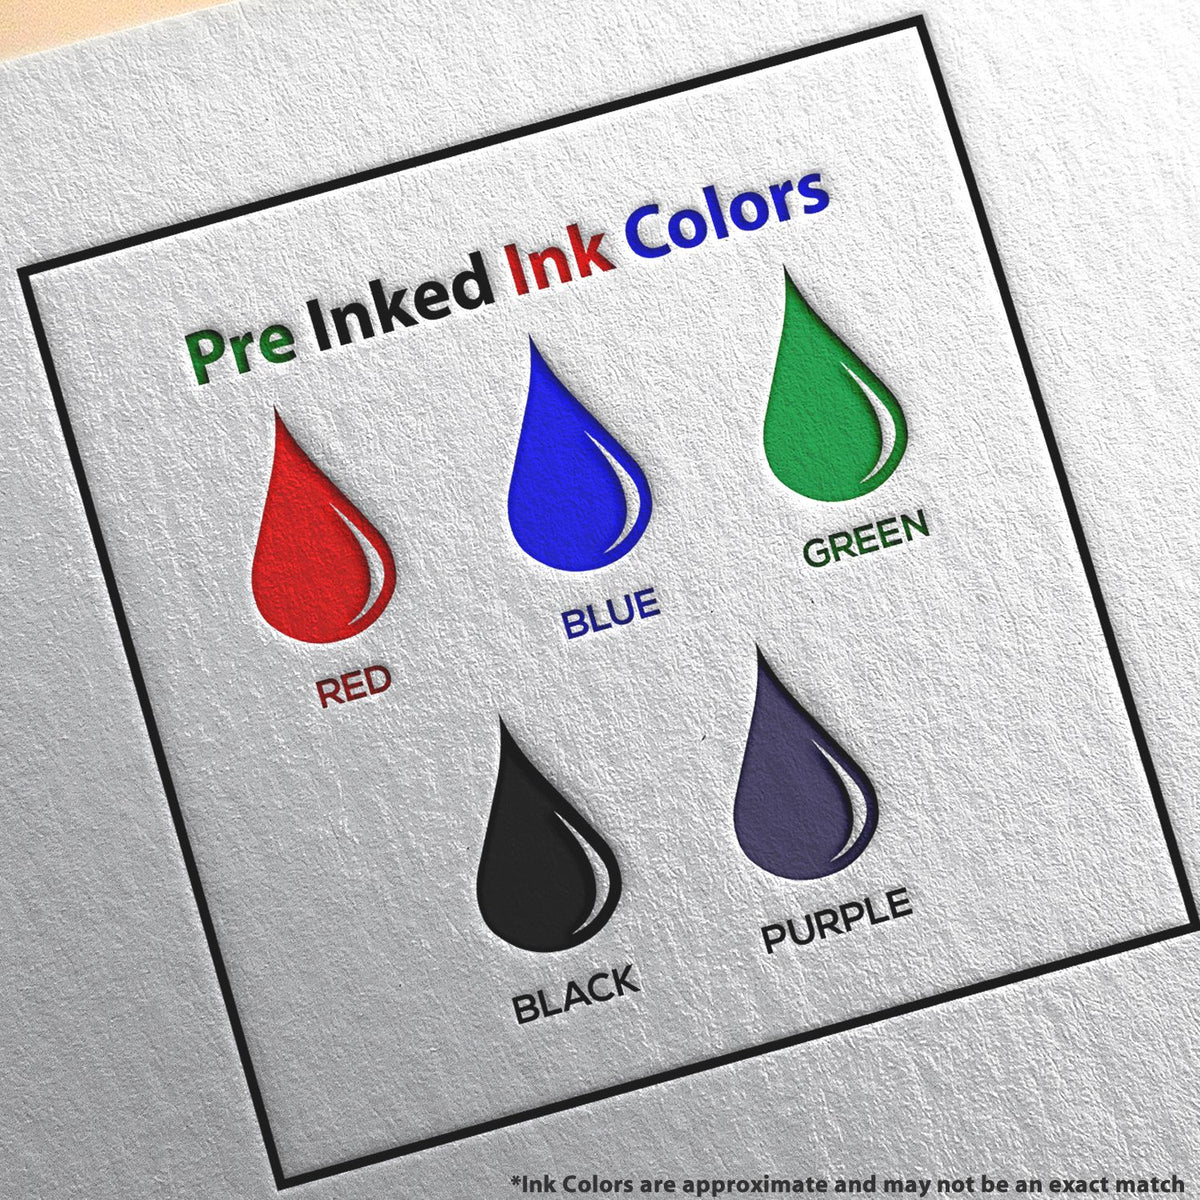 A picture showing the different ink colors or hues available for the Slim Pre-Inked Wyoming Landscape Architect Seal Stamp product.